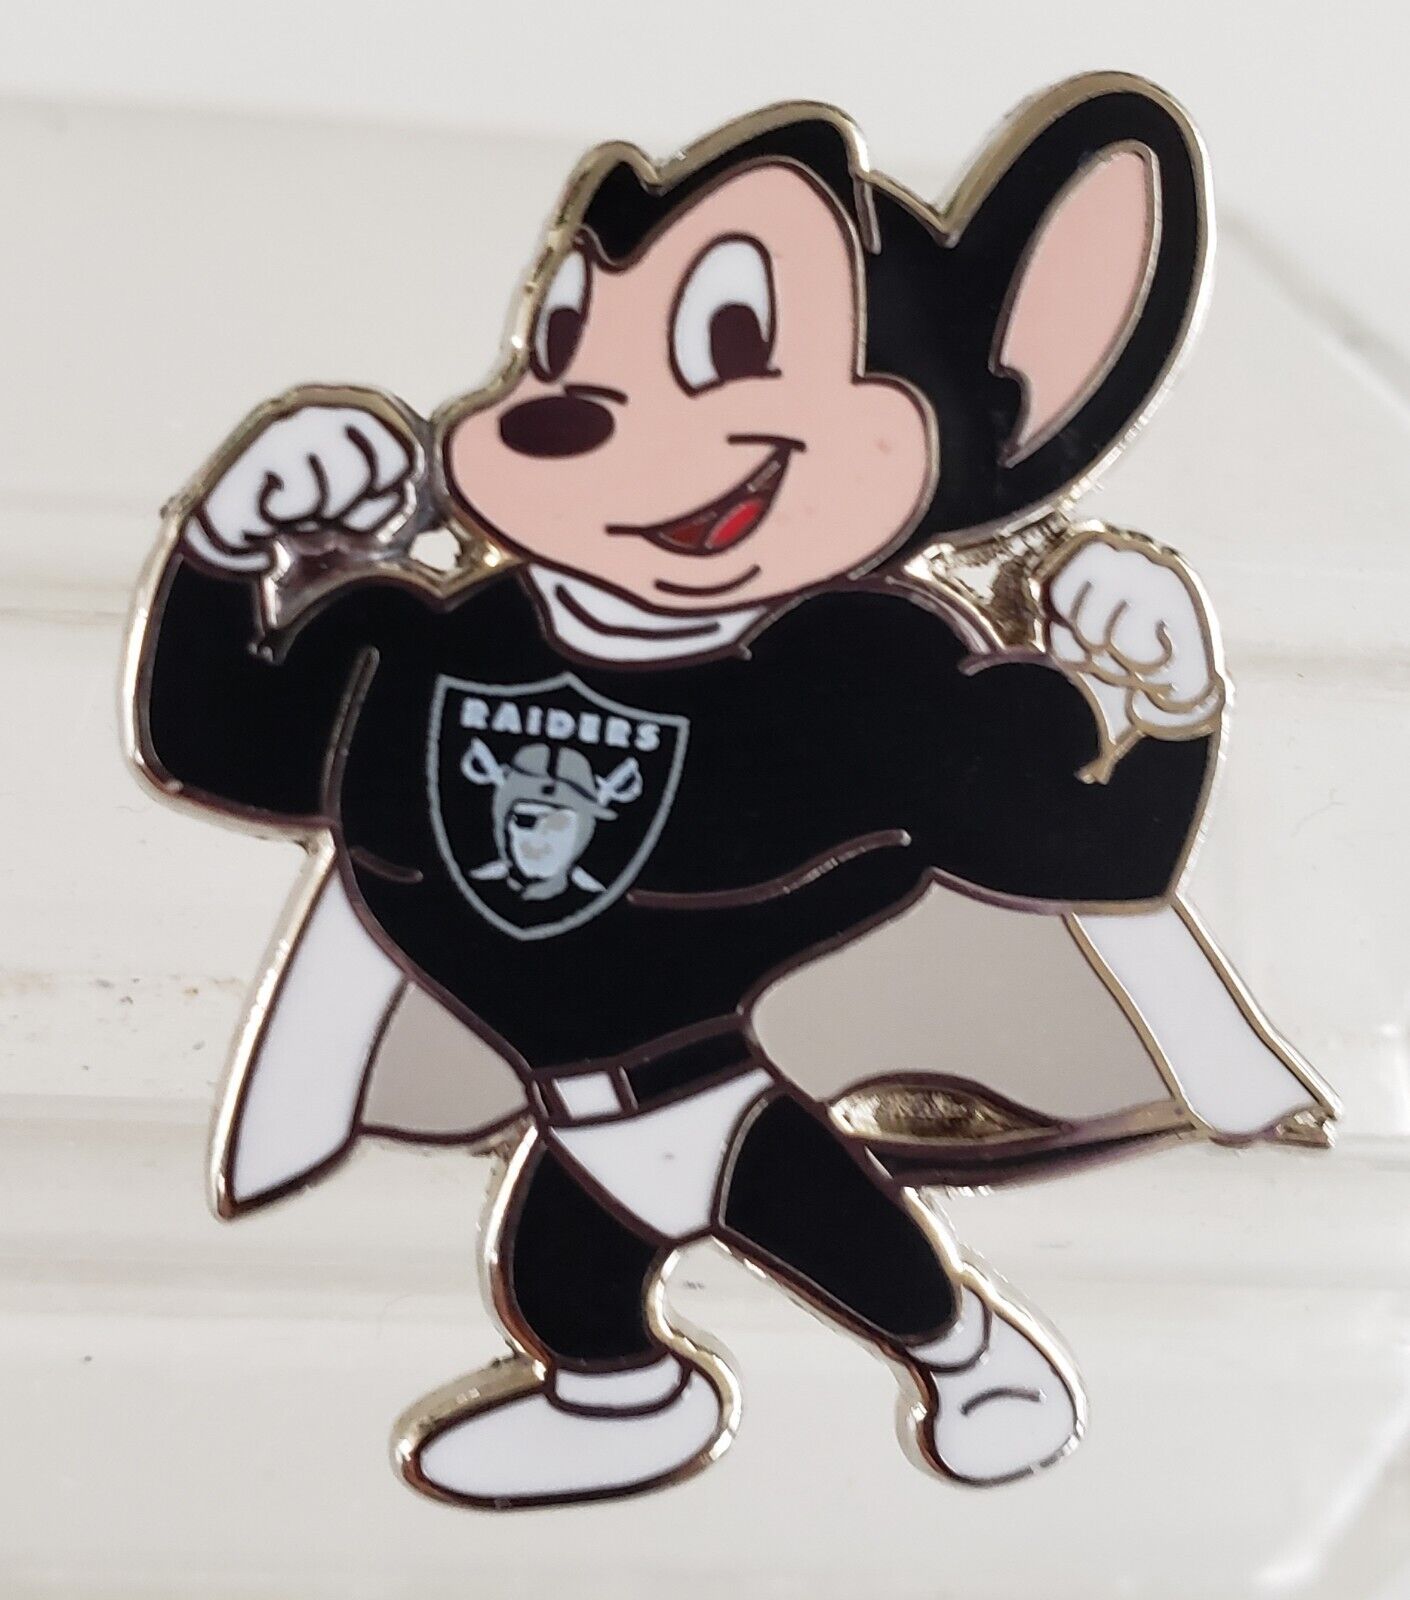 NFL LAS VEGAS RAIDERS MIGHTY MOUSE PIN-GREAT GIFT IDEA-FREE SHIPPING